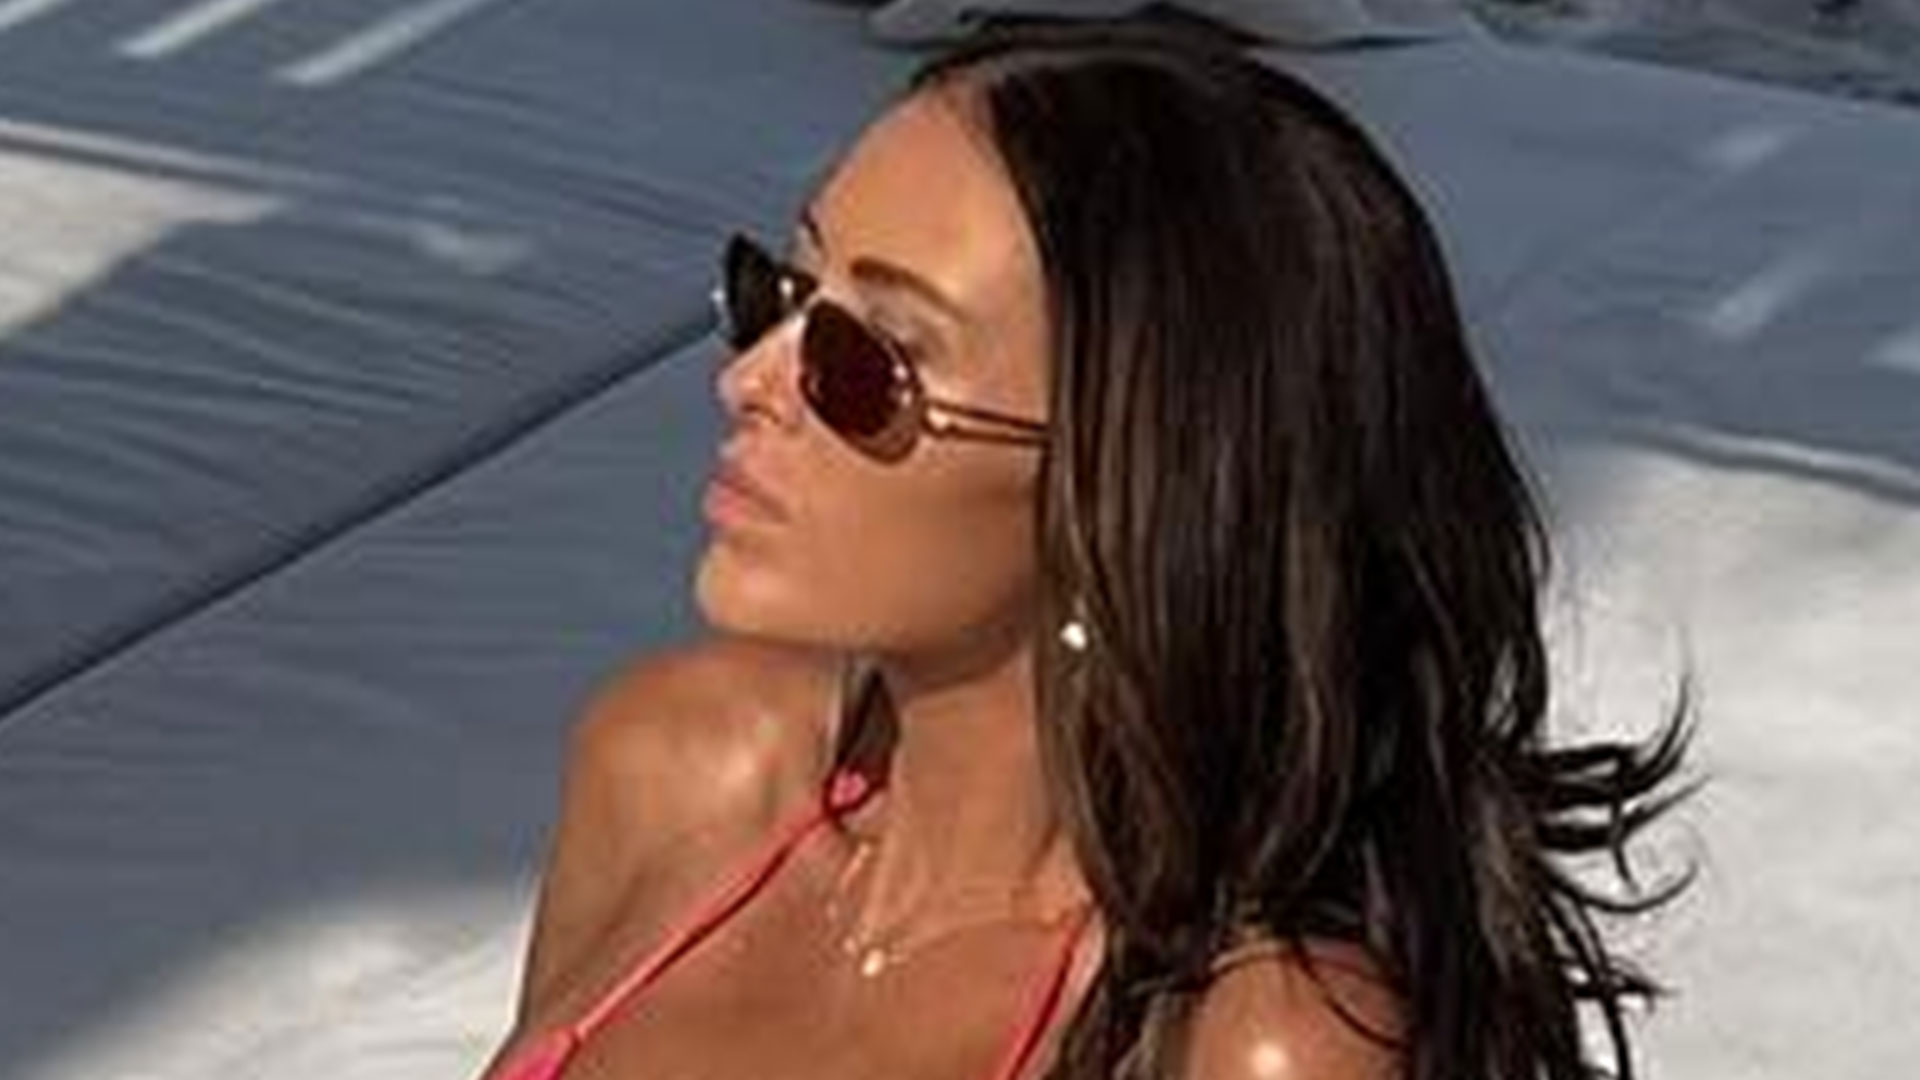 Stunning golf Wag Paulina Gretzky puts on busty display in bikini as fans say ‘I guess DJ gave up golf – I would too’ [Video]